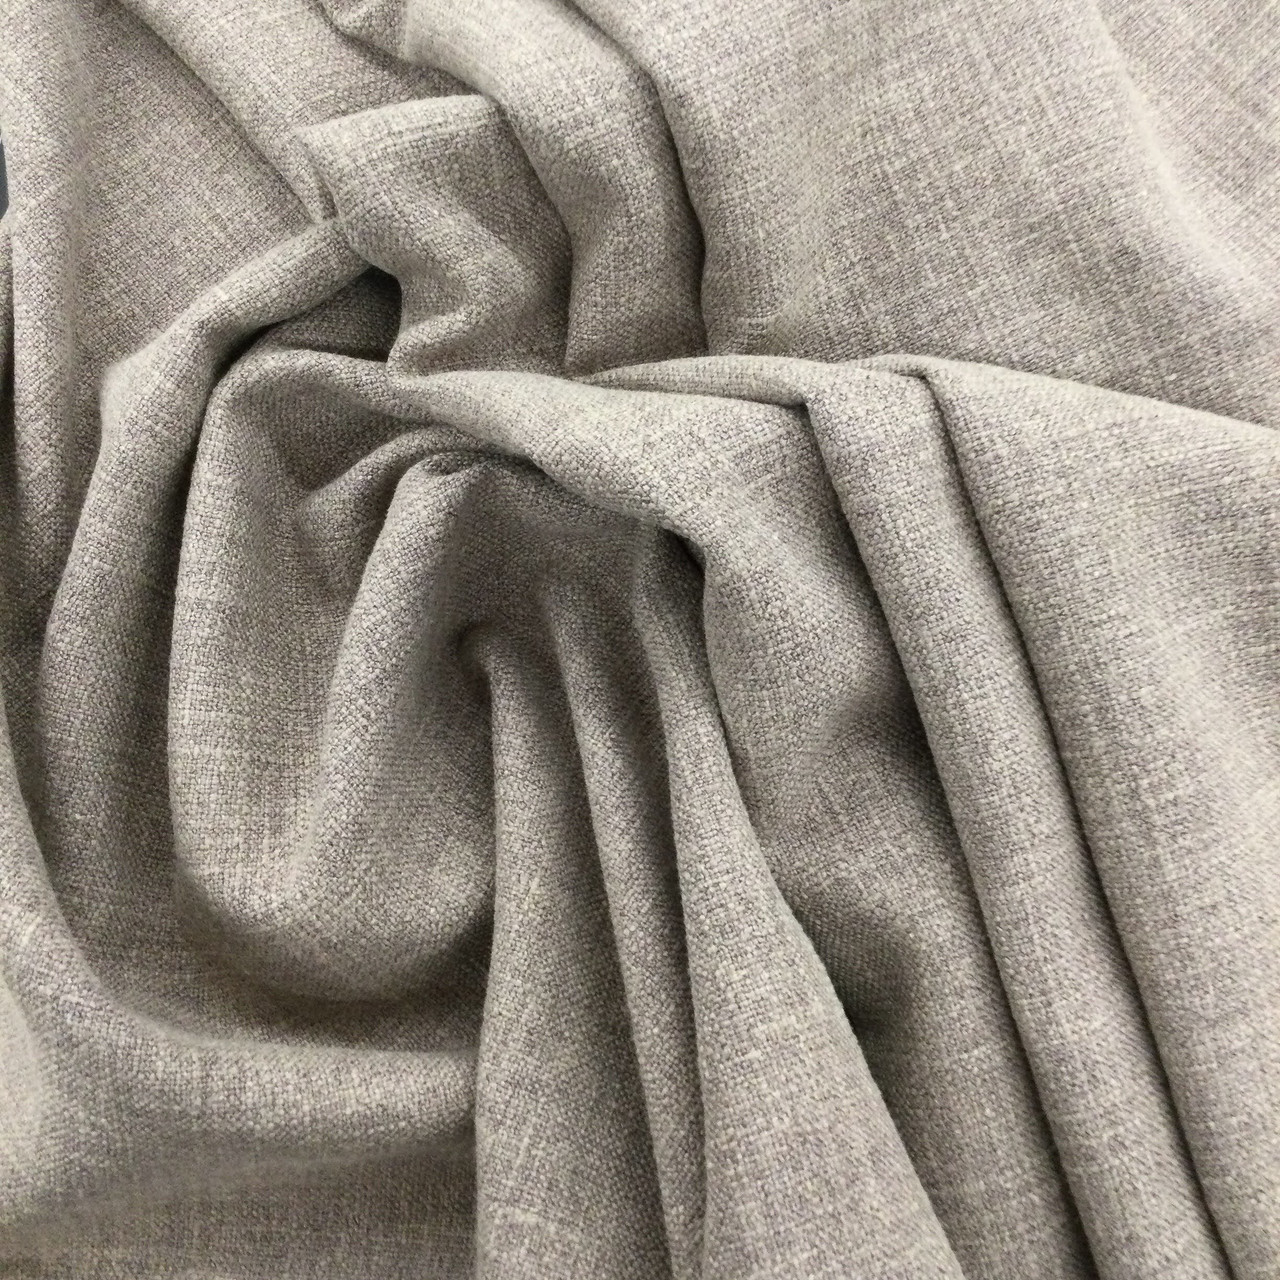 Soft Linen Fabric Material curtains dress material 140cm wide- Plain Taupe  Brown